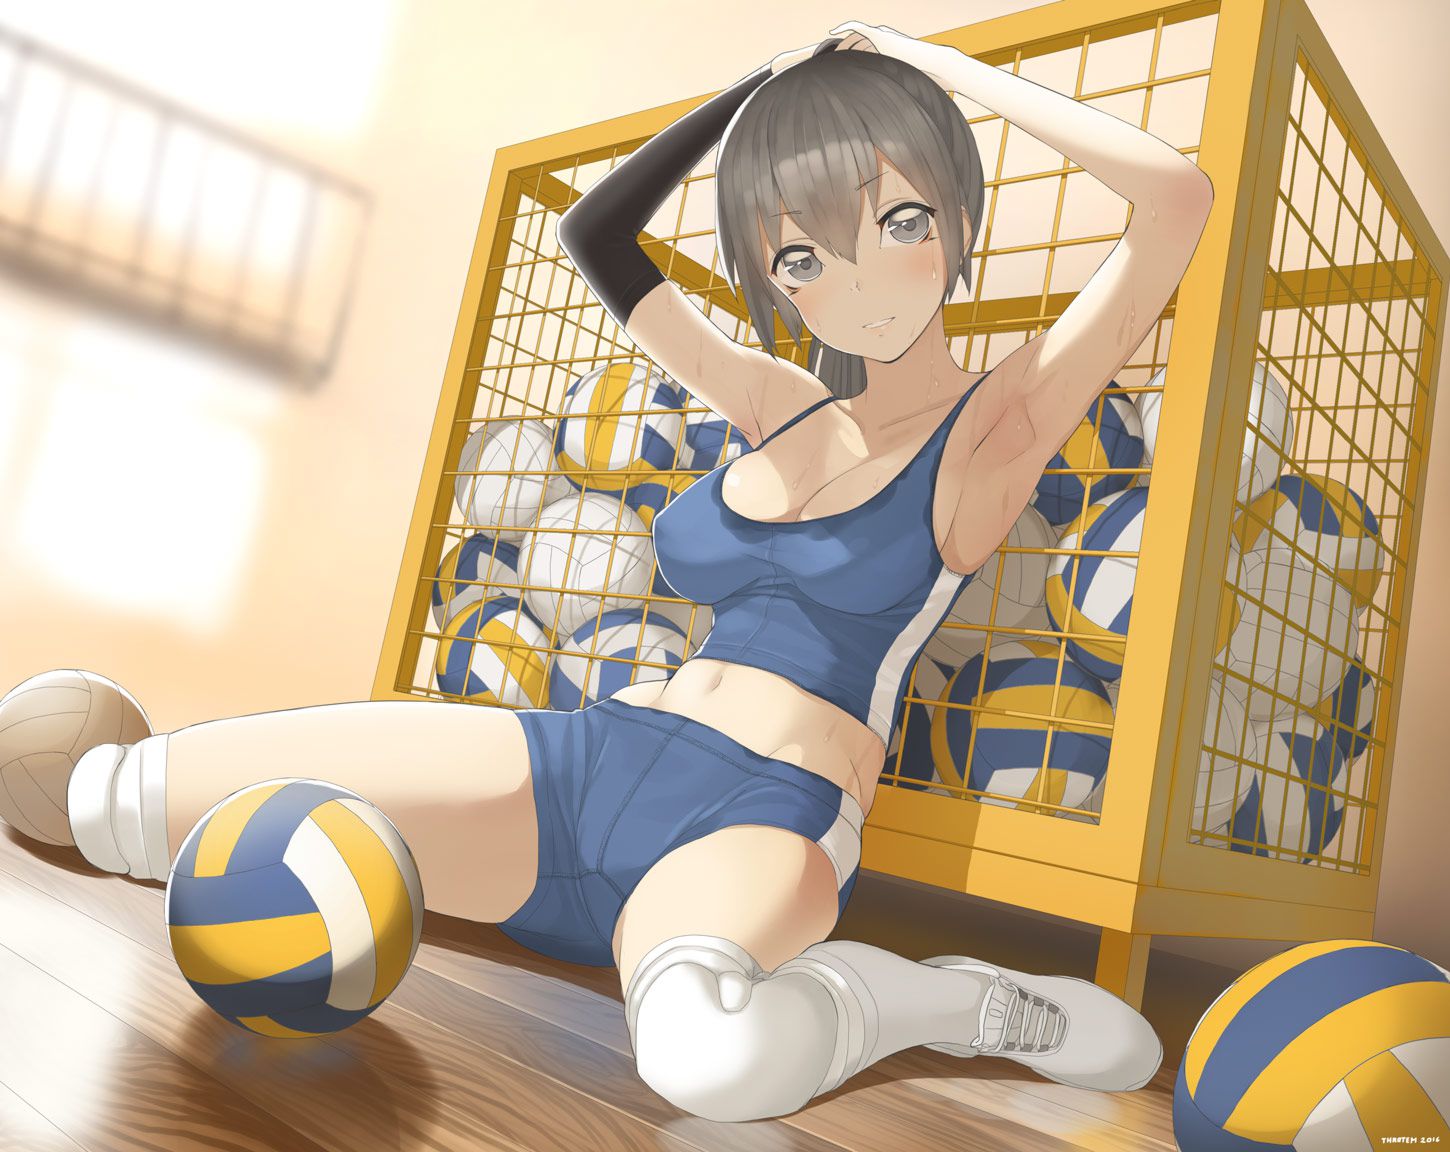 【Secondary erotic】 Here is an erotic image of a girl wearing sportswear and having a body conspicuous 24